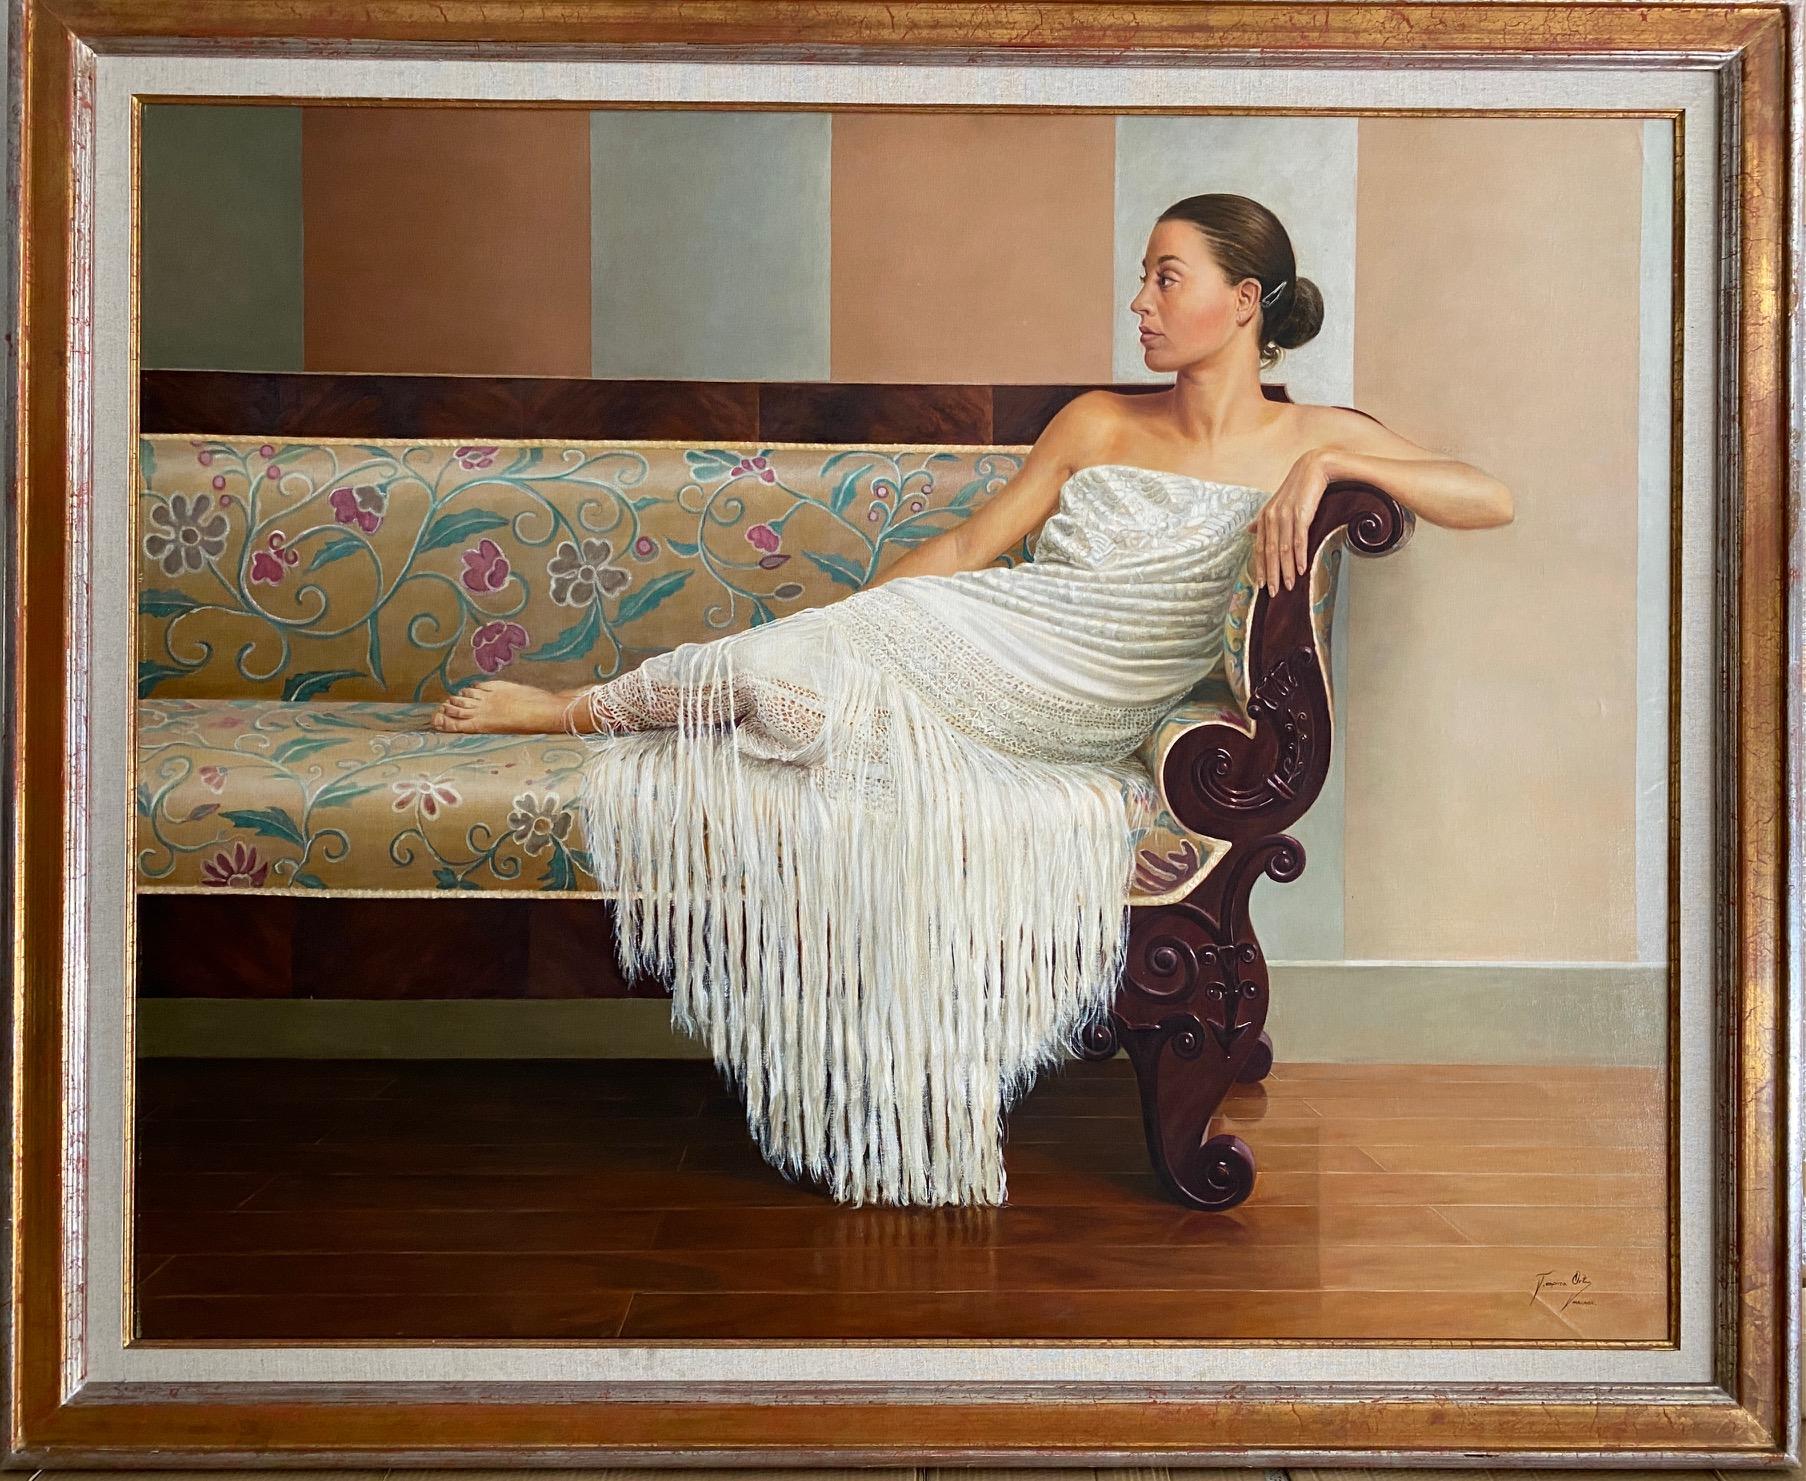 Serenity (Serenidad). Spanish Contemporary Figurative Realism. Oil on canvas - Realist Painting by Ospina Ortiz